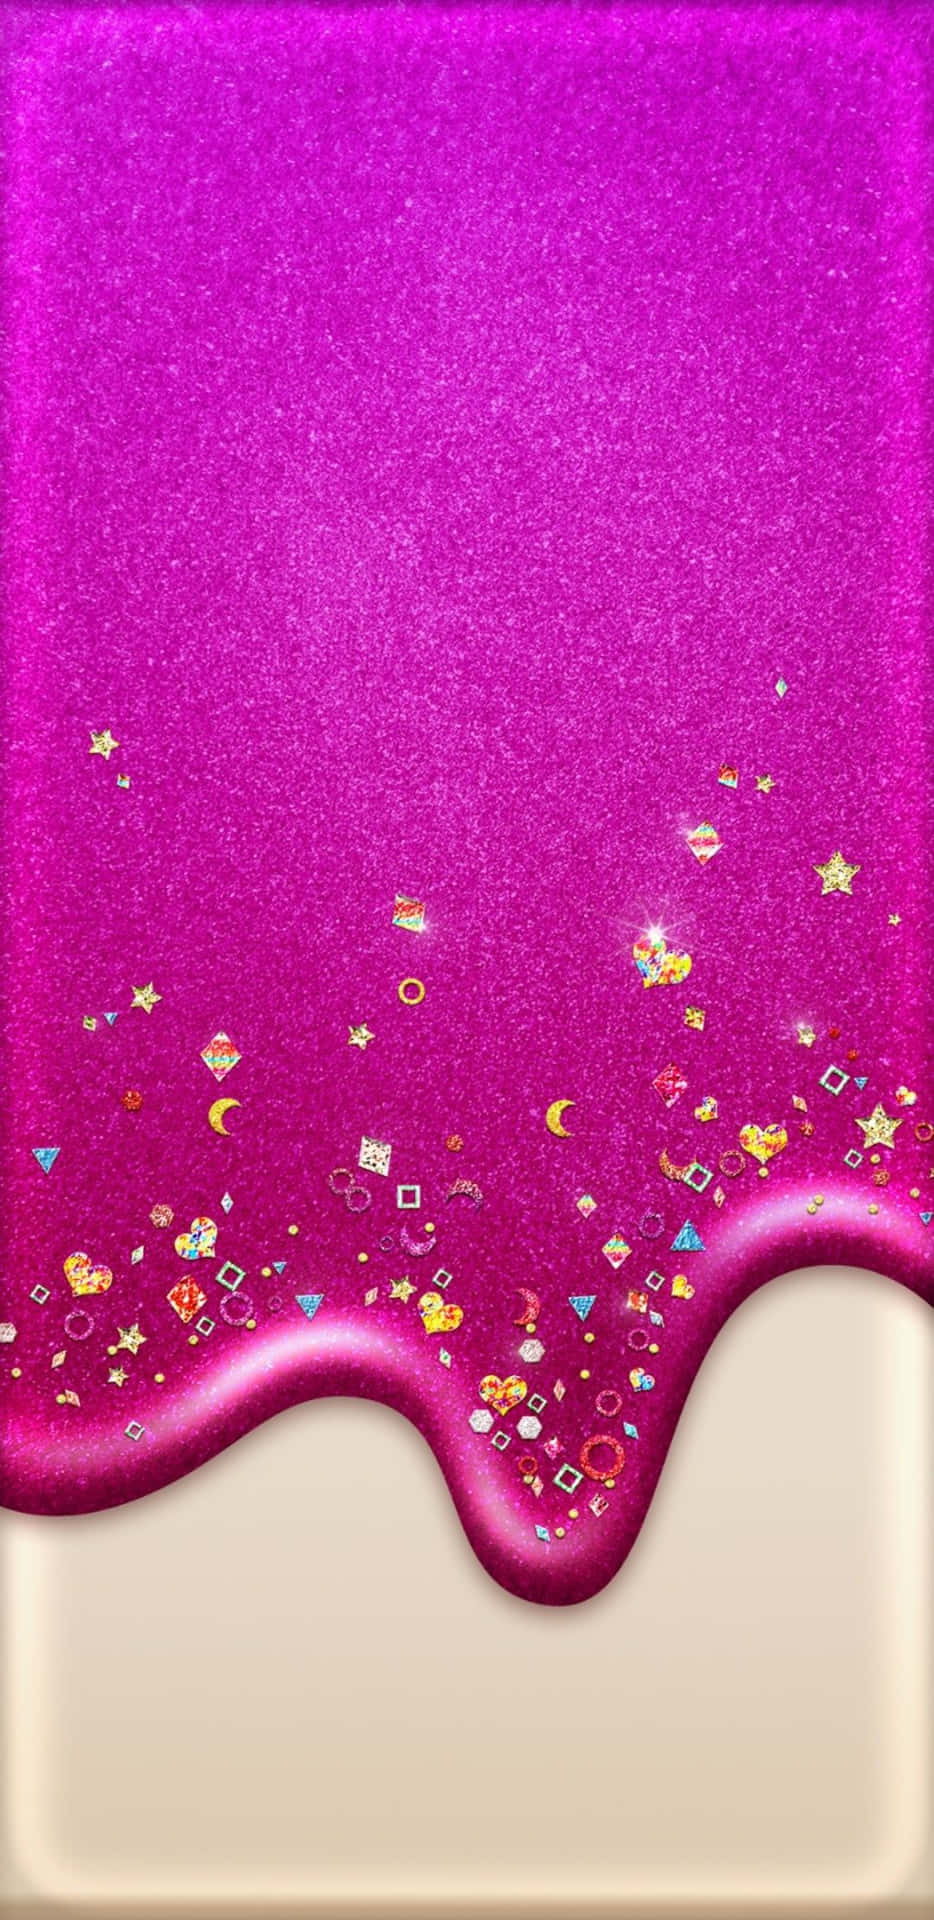 Colorful and Fun Slime Background